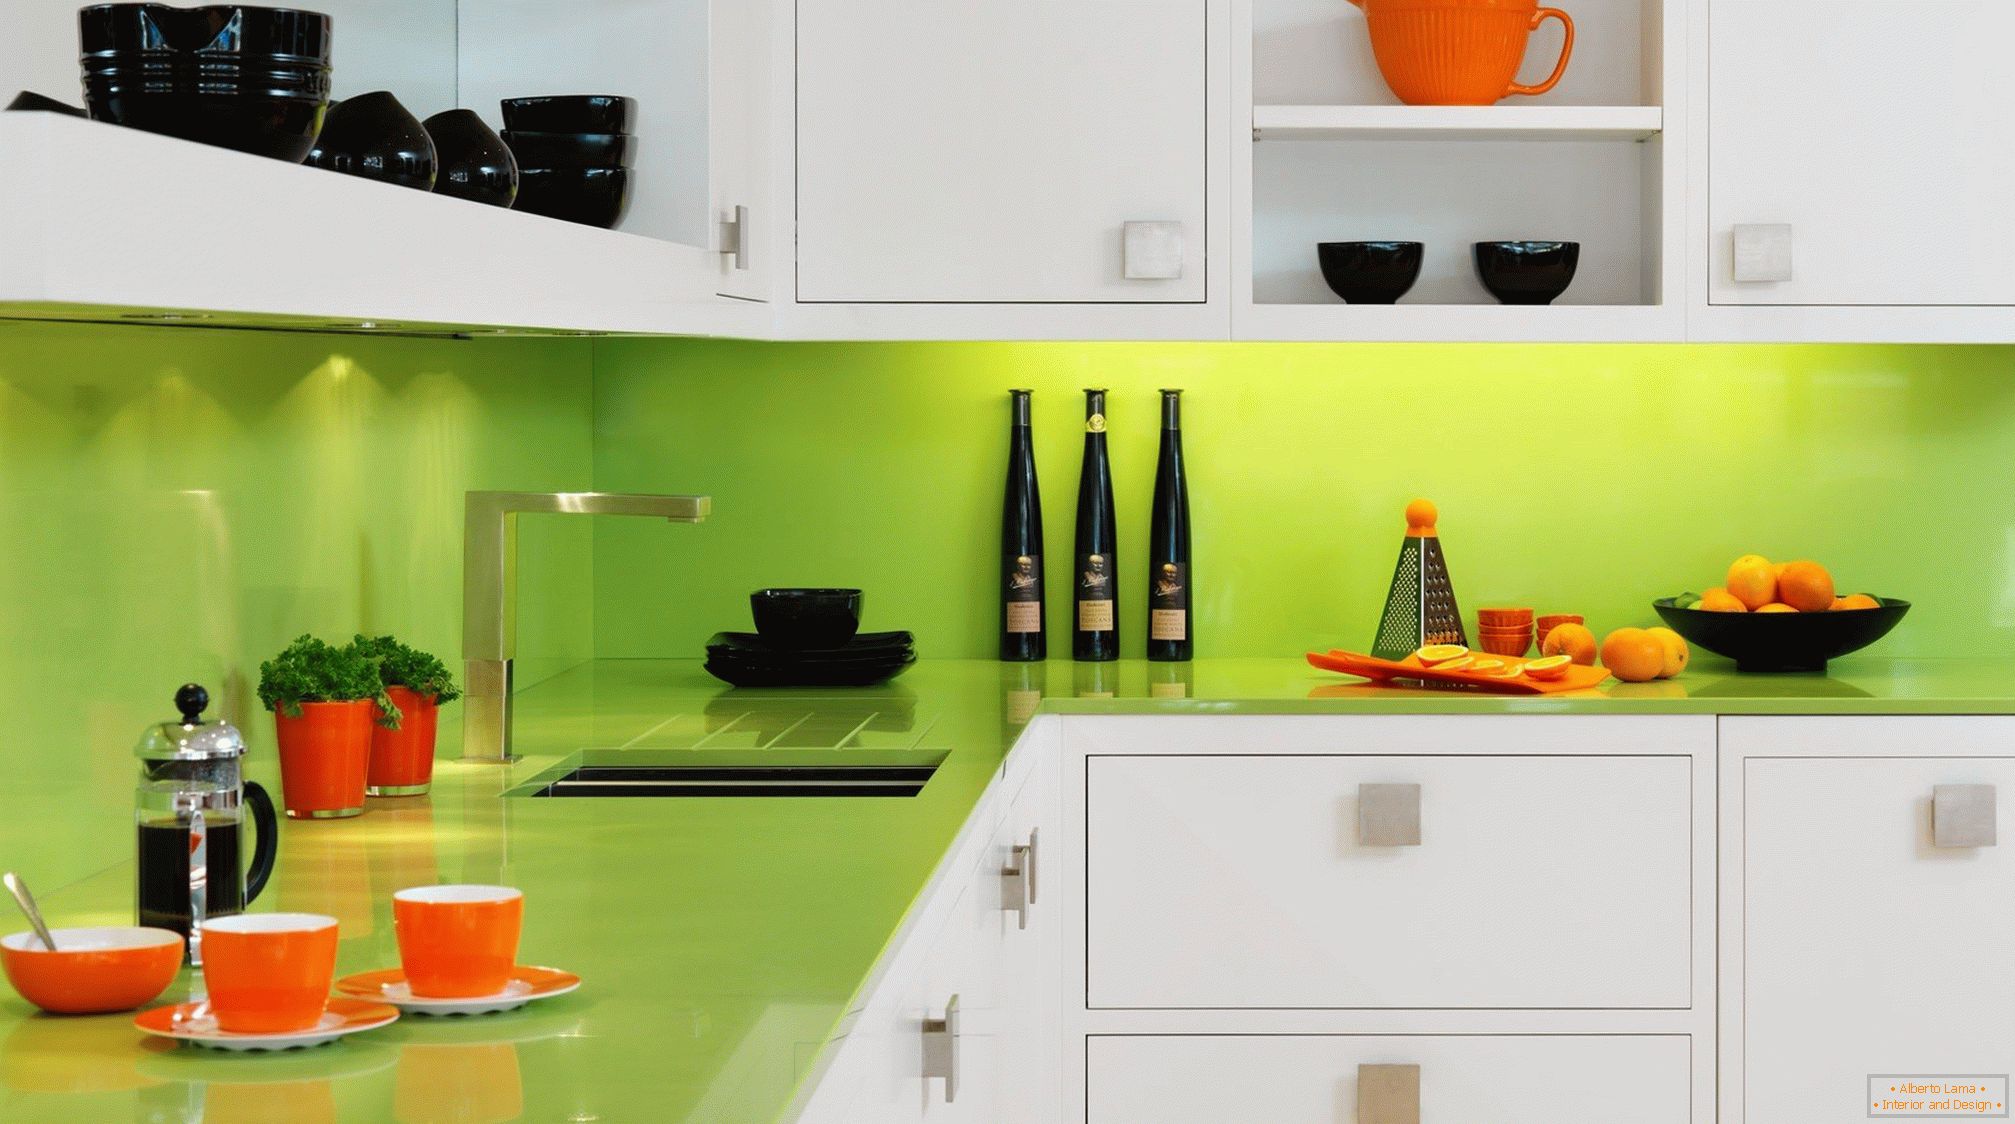 Orange and black dishes in a white-green kitchen